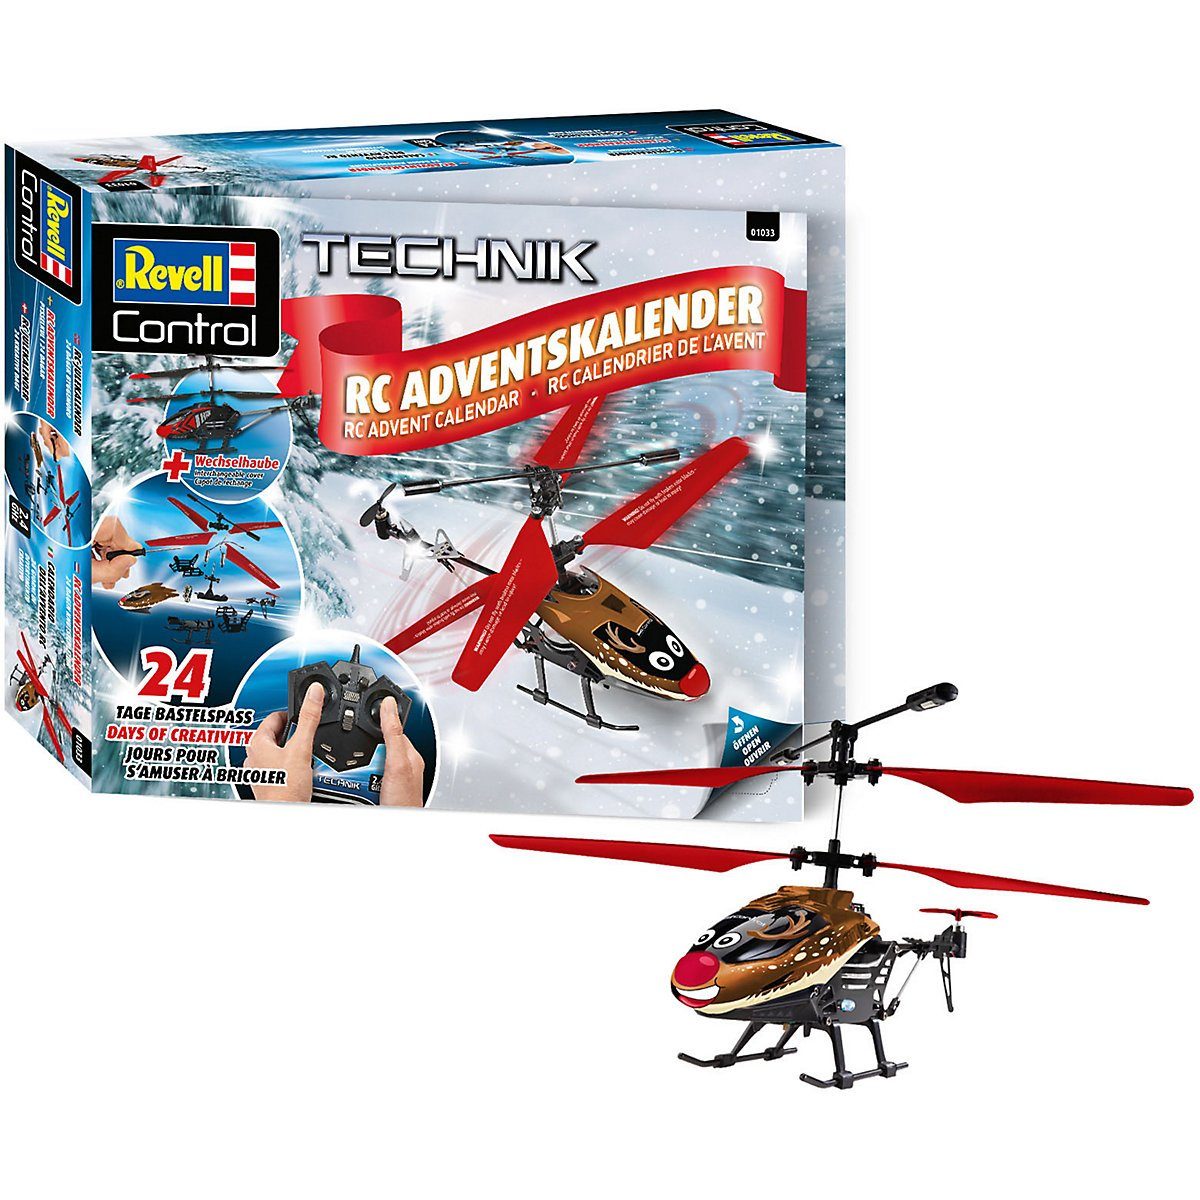 REVELL 01042 Control RC Adventskalender 2022 Helicopter